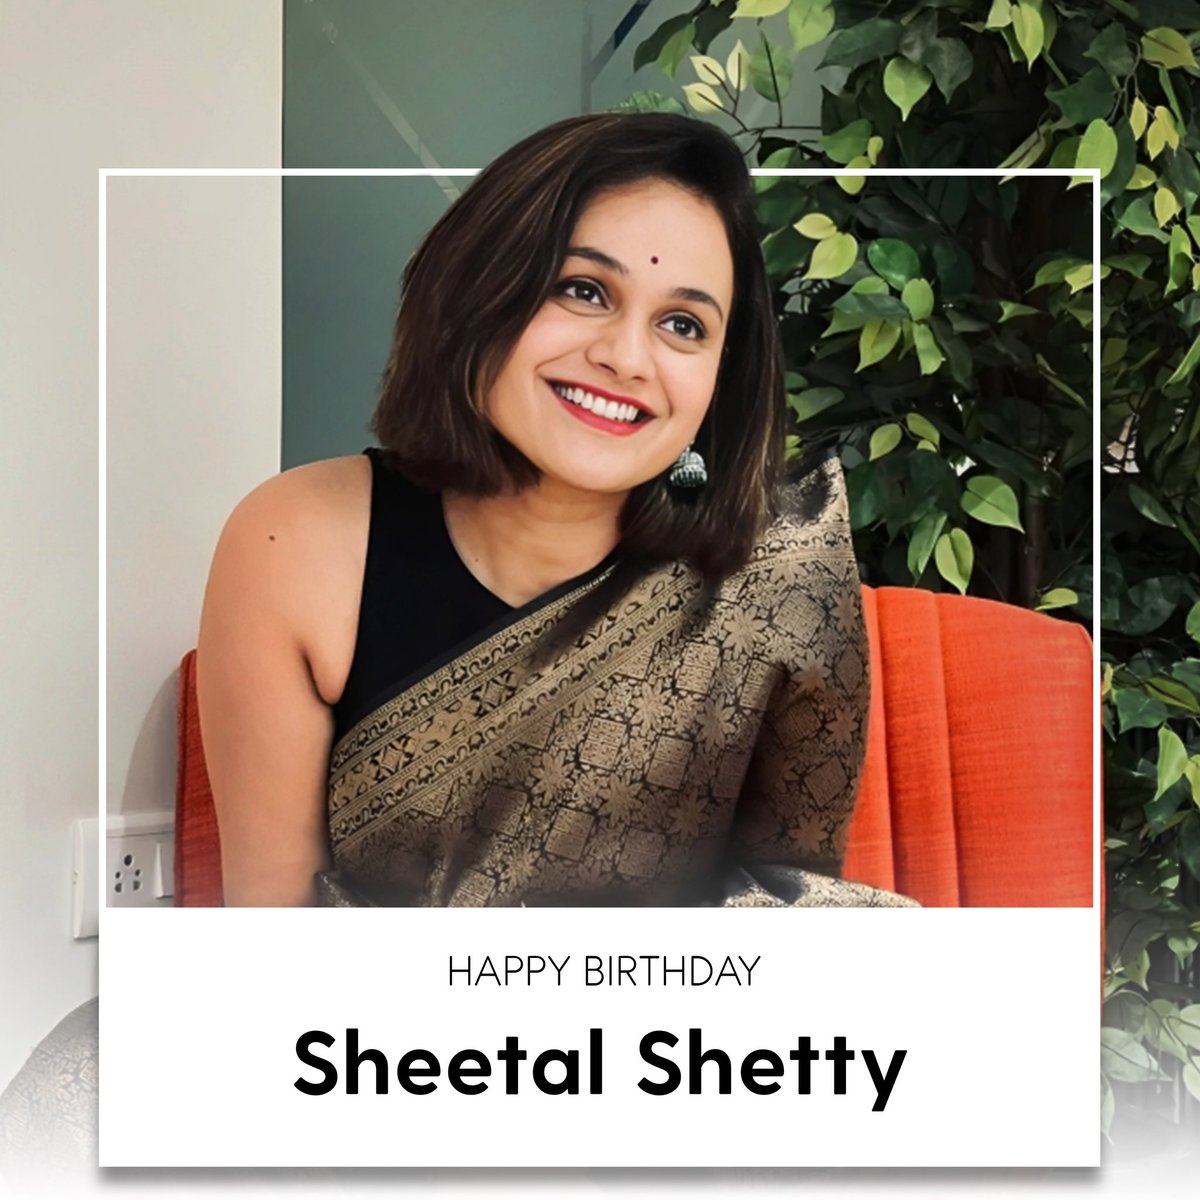 May you continue to explore the wonders that the field of cinema has to offer and outdo the bars that you have set for yourself. Happy birthday Sheetu. Wishing you smile and success always 🤗🤗♥️ ಹುಟ್ಟುಹಬ್ಬದ ಹಾರ್ದಿಕ ಶುಭಾಶಯಗಳು @isheetalshetty ✨